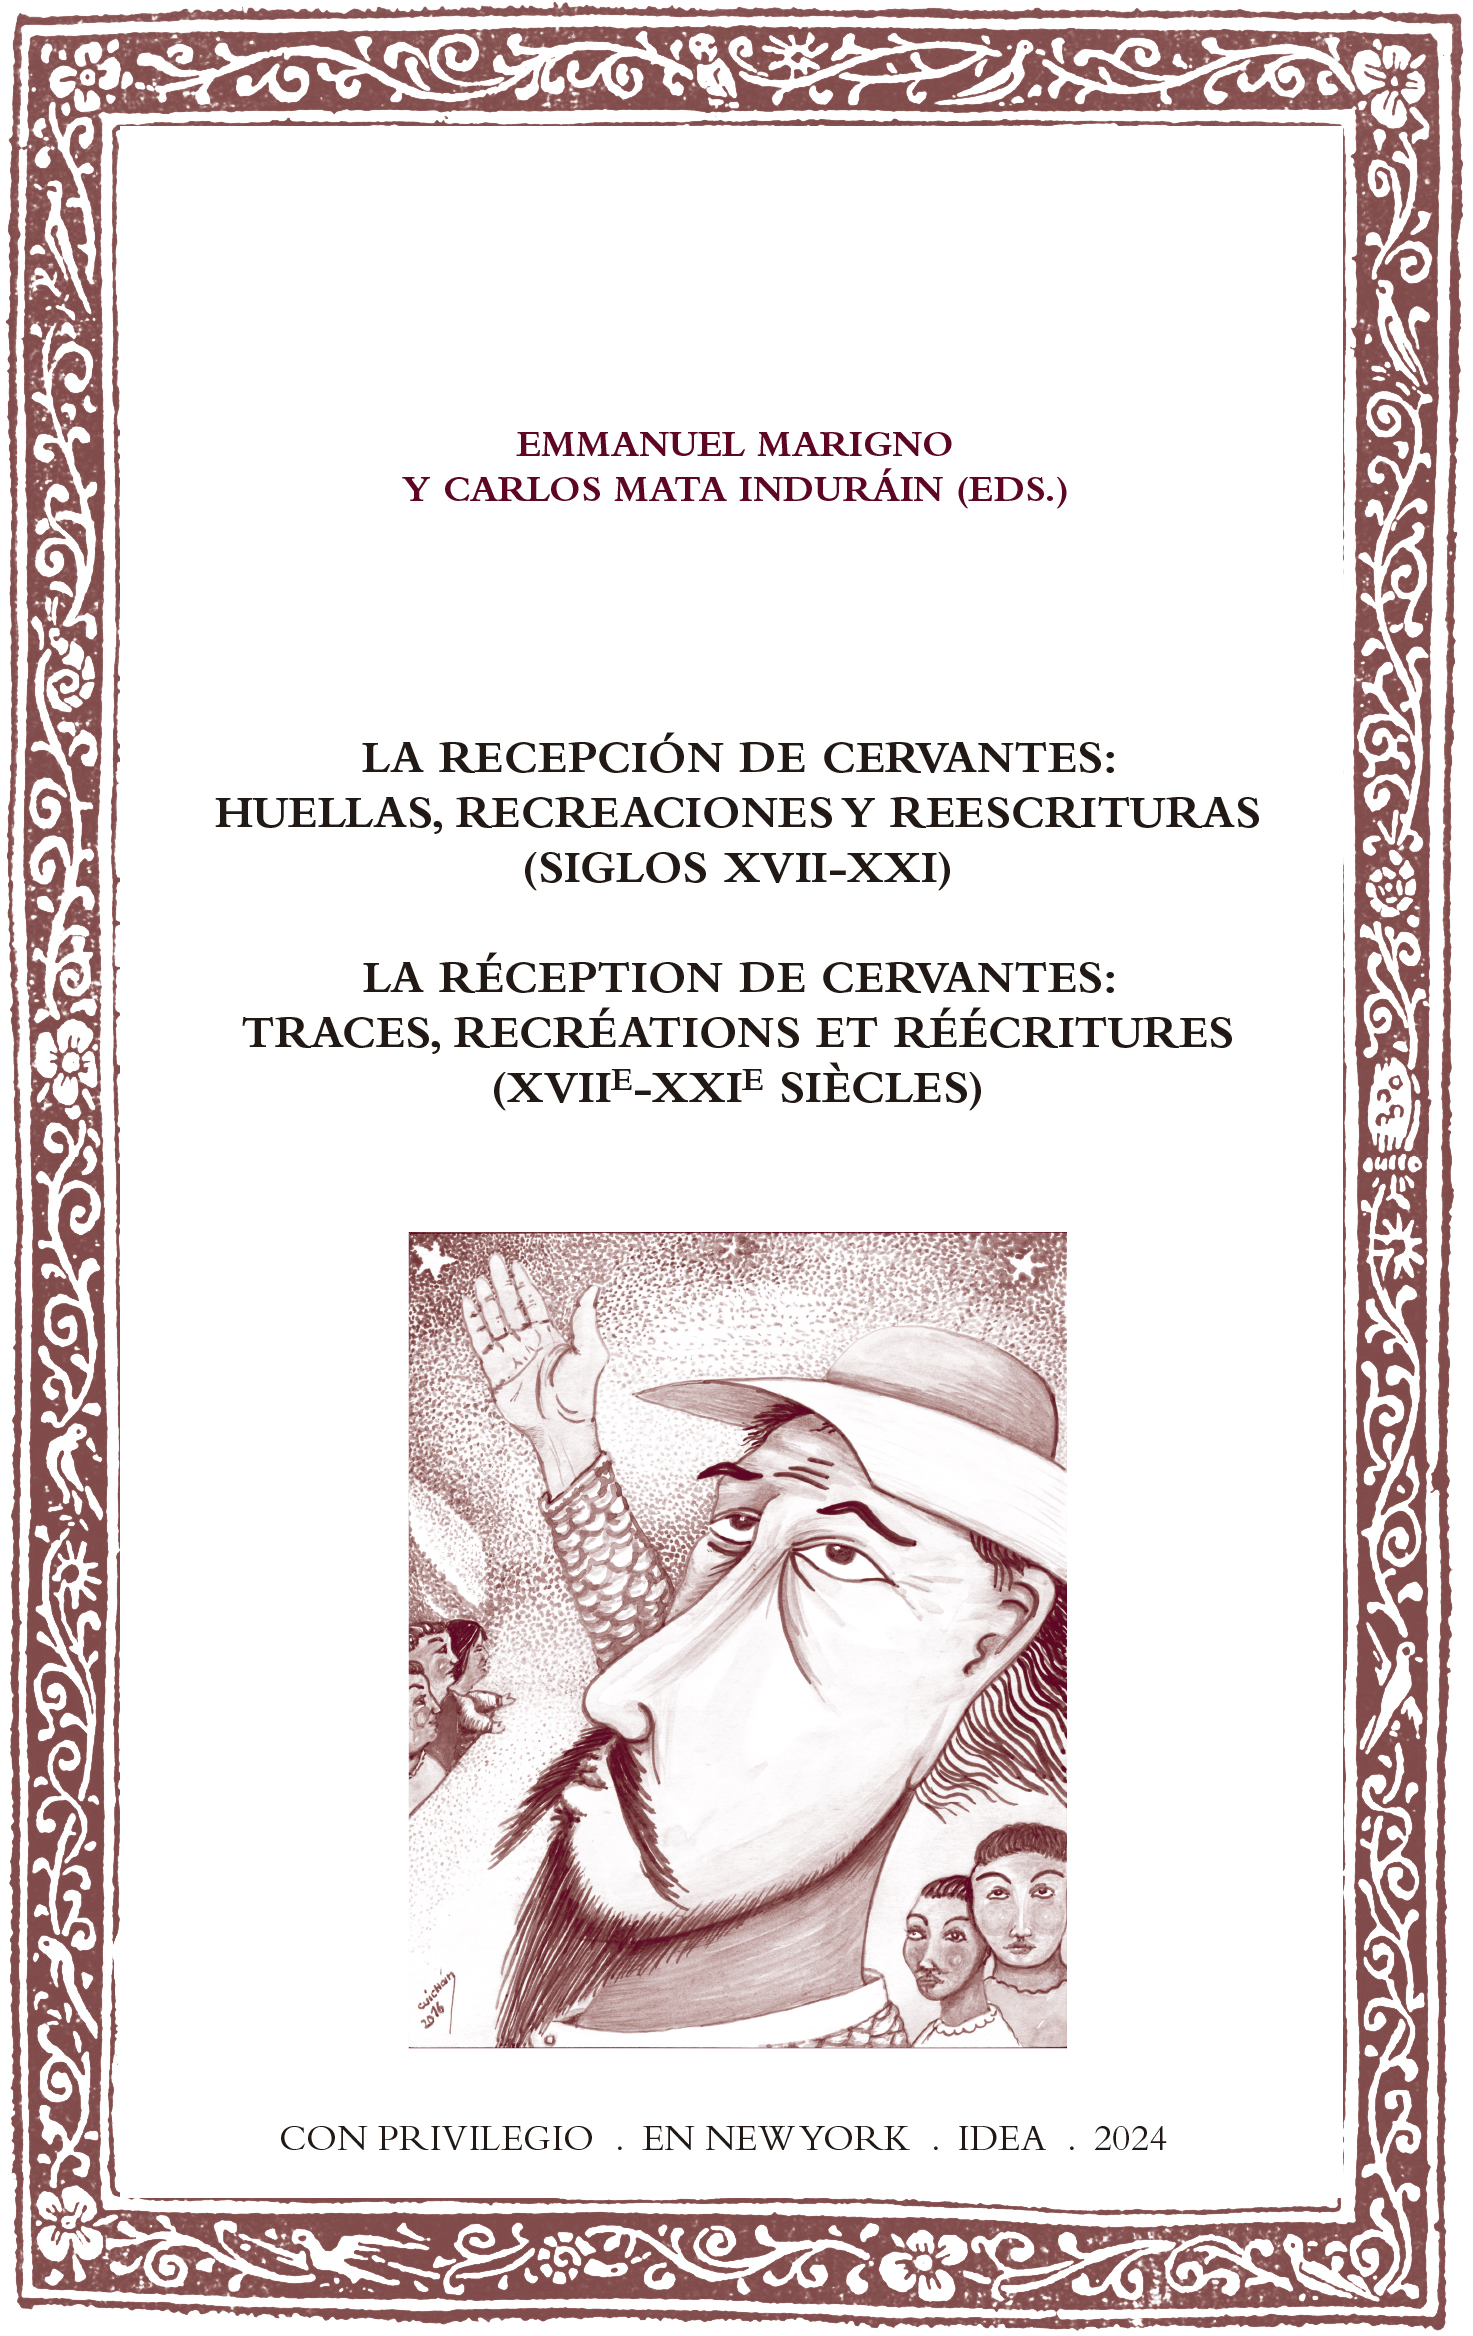  Batihoja 95. The reception of Cervantes: traces, recreations and rewritings (XVII-XXI centuries). 